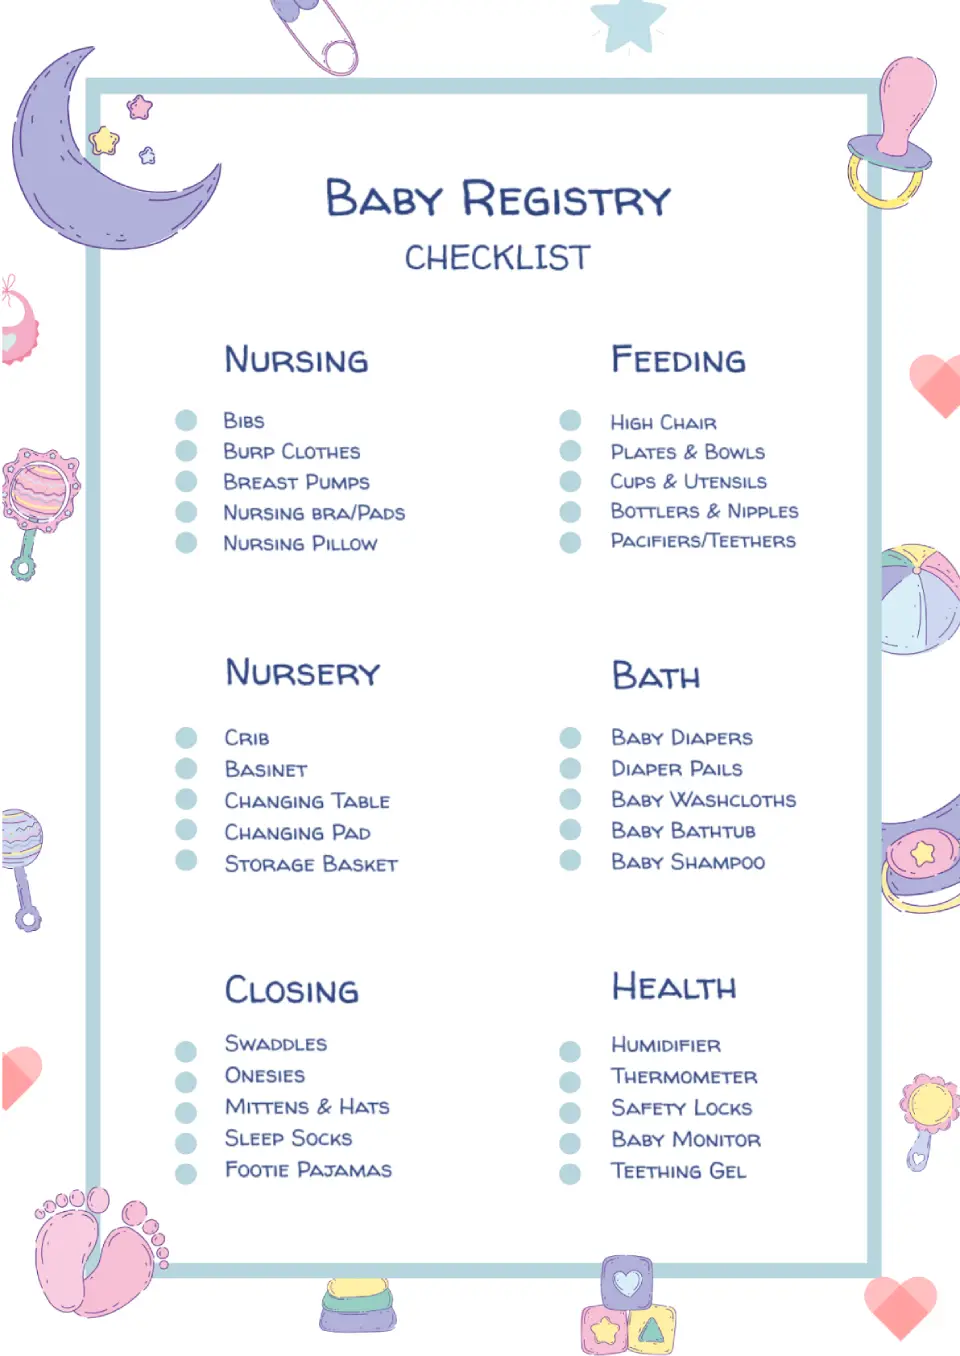 Baby Registry Checklist Template for Google Docs